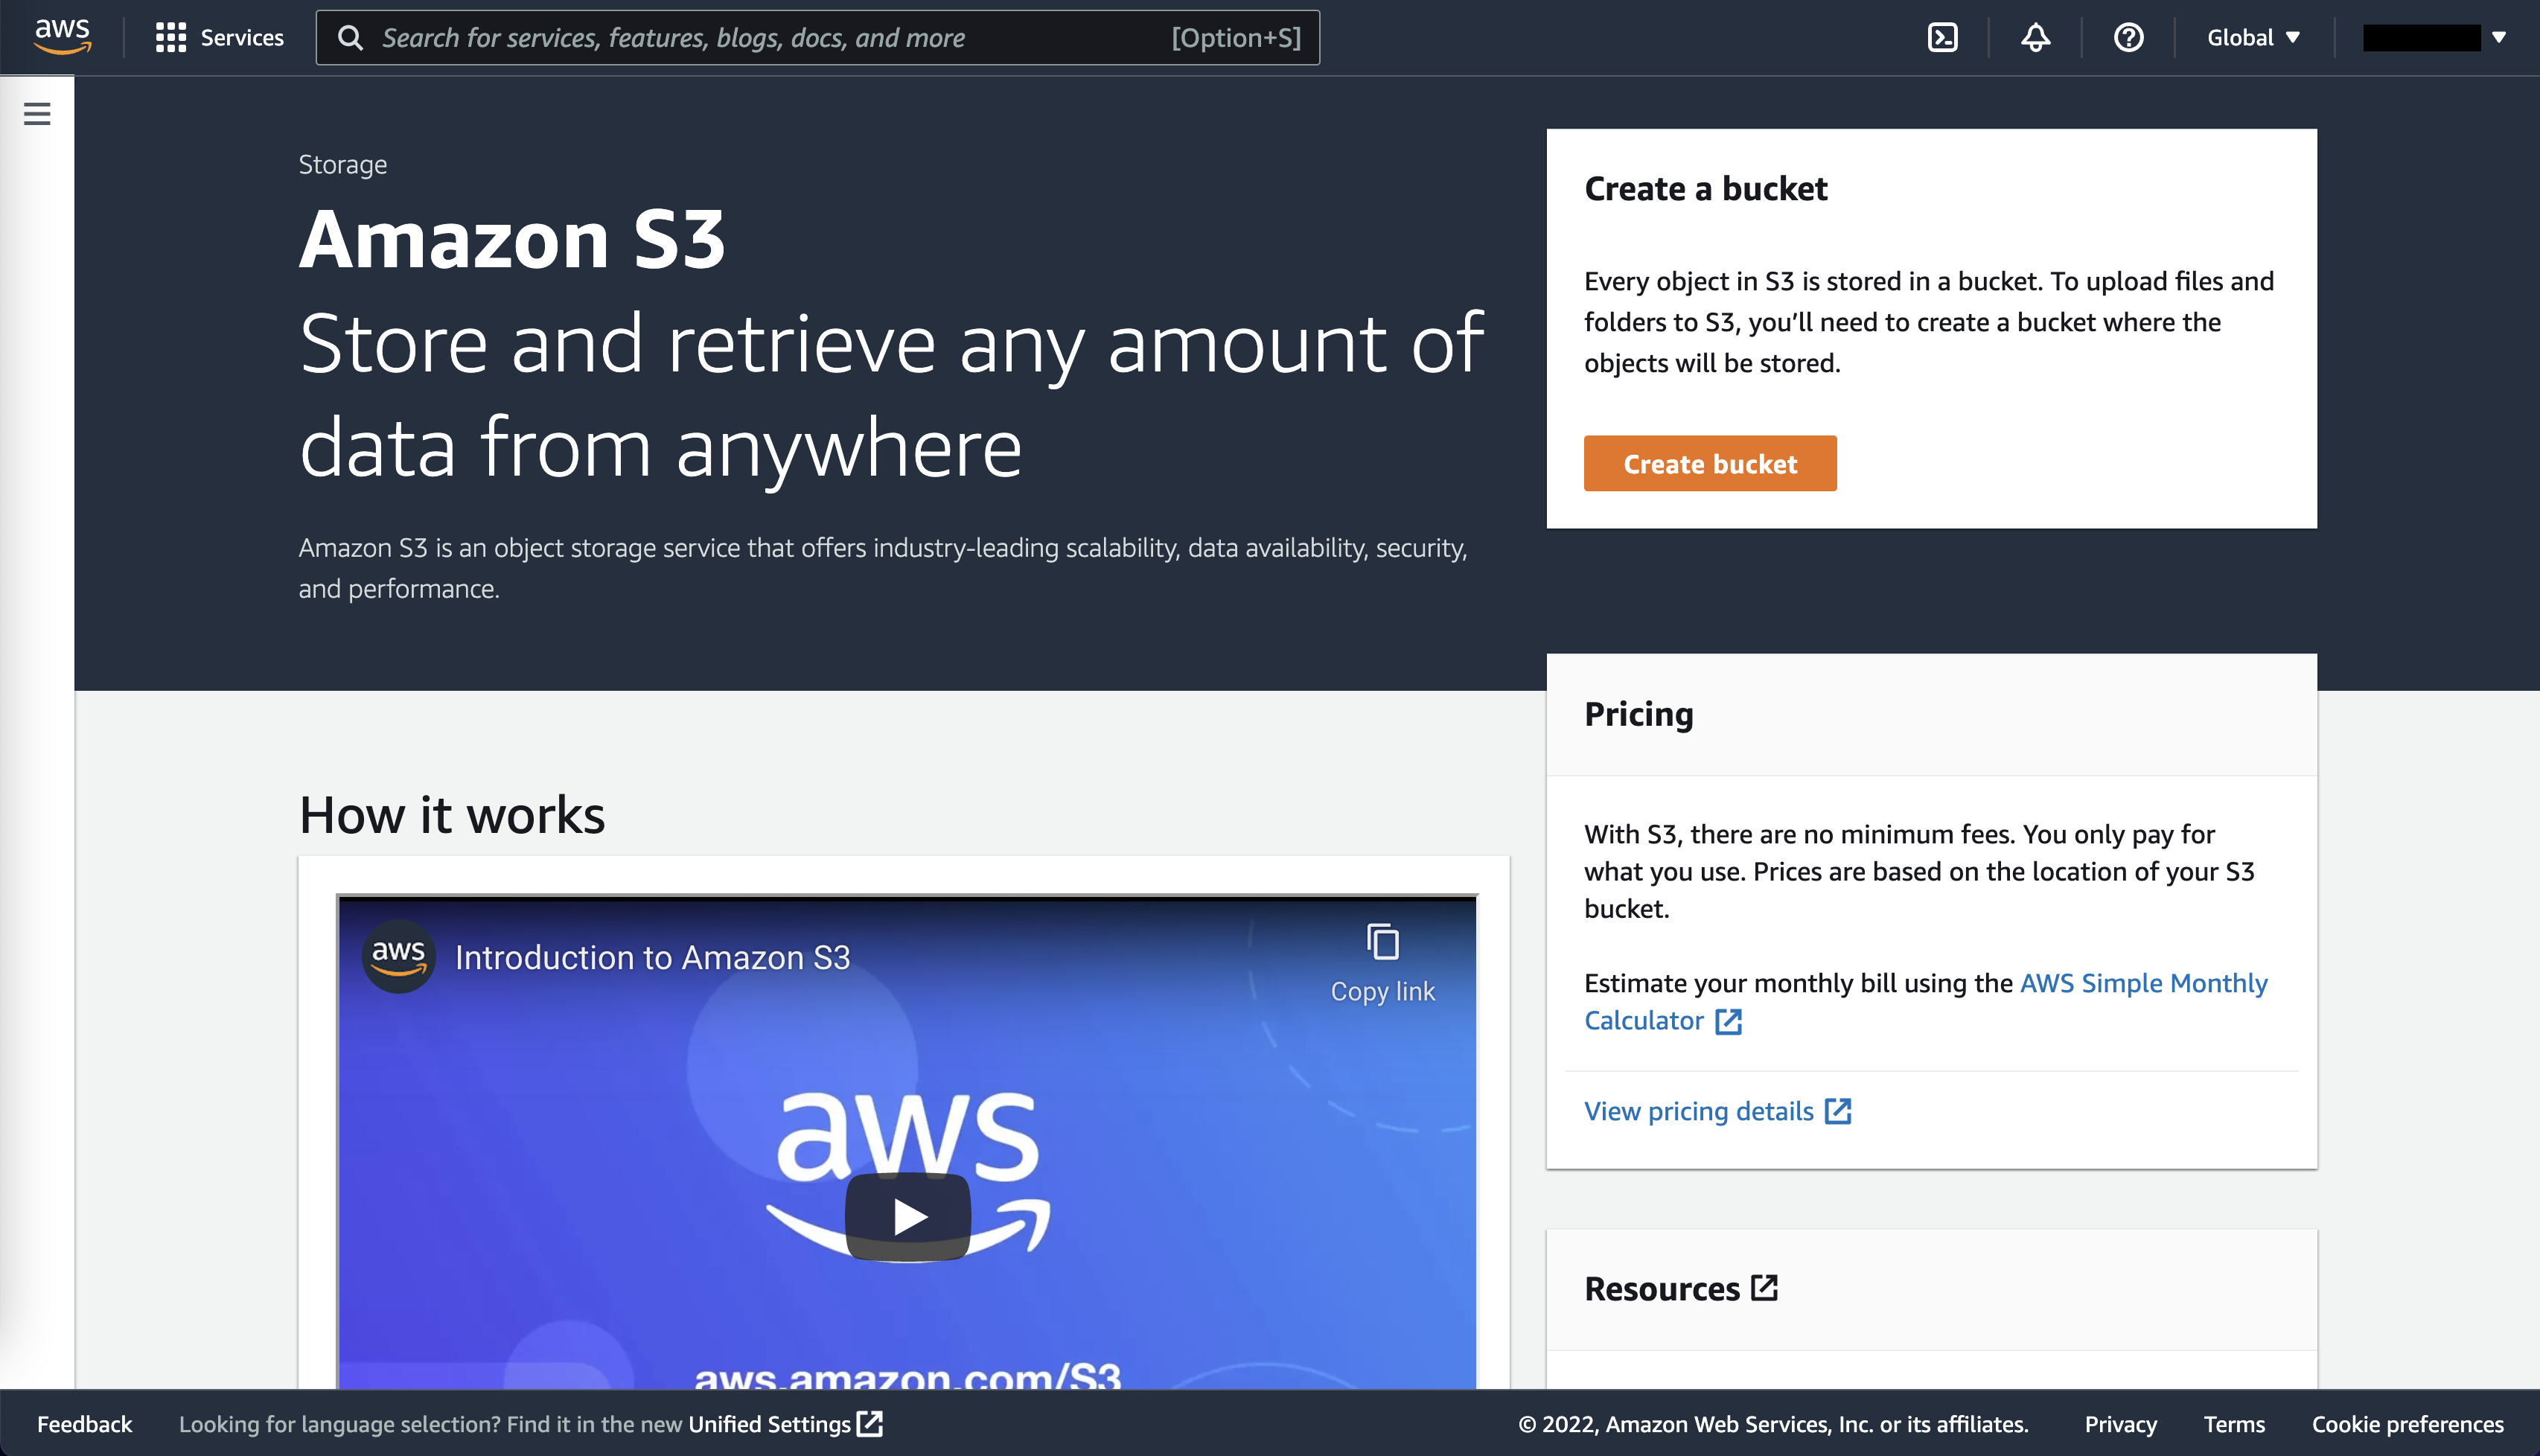 Landing page for AWS S3